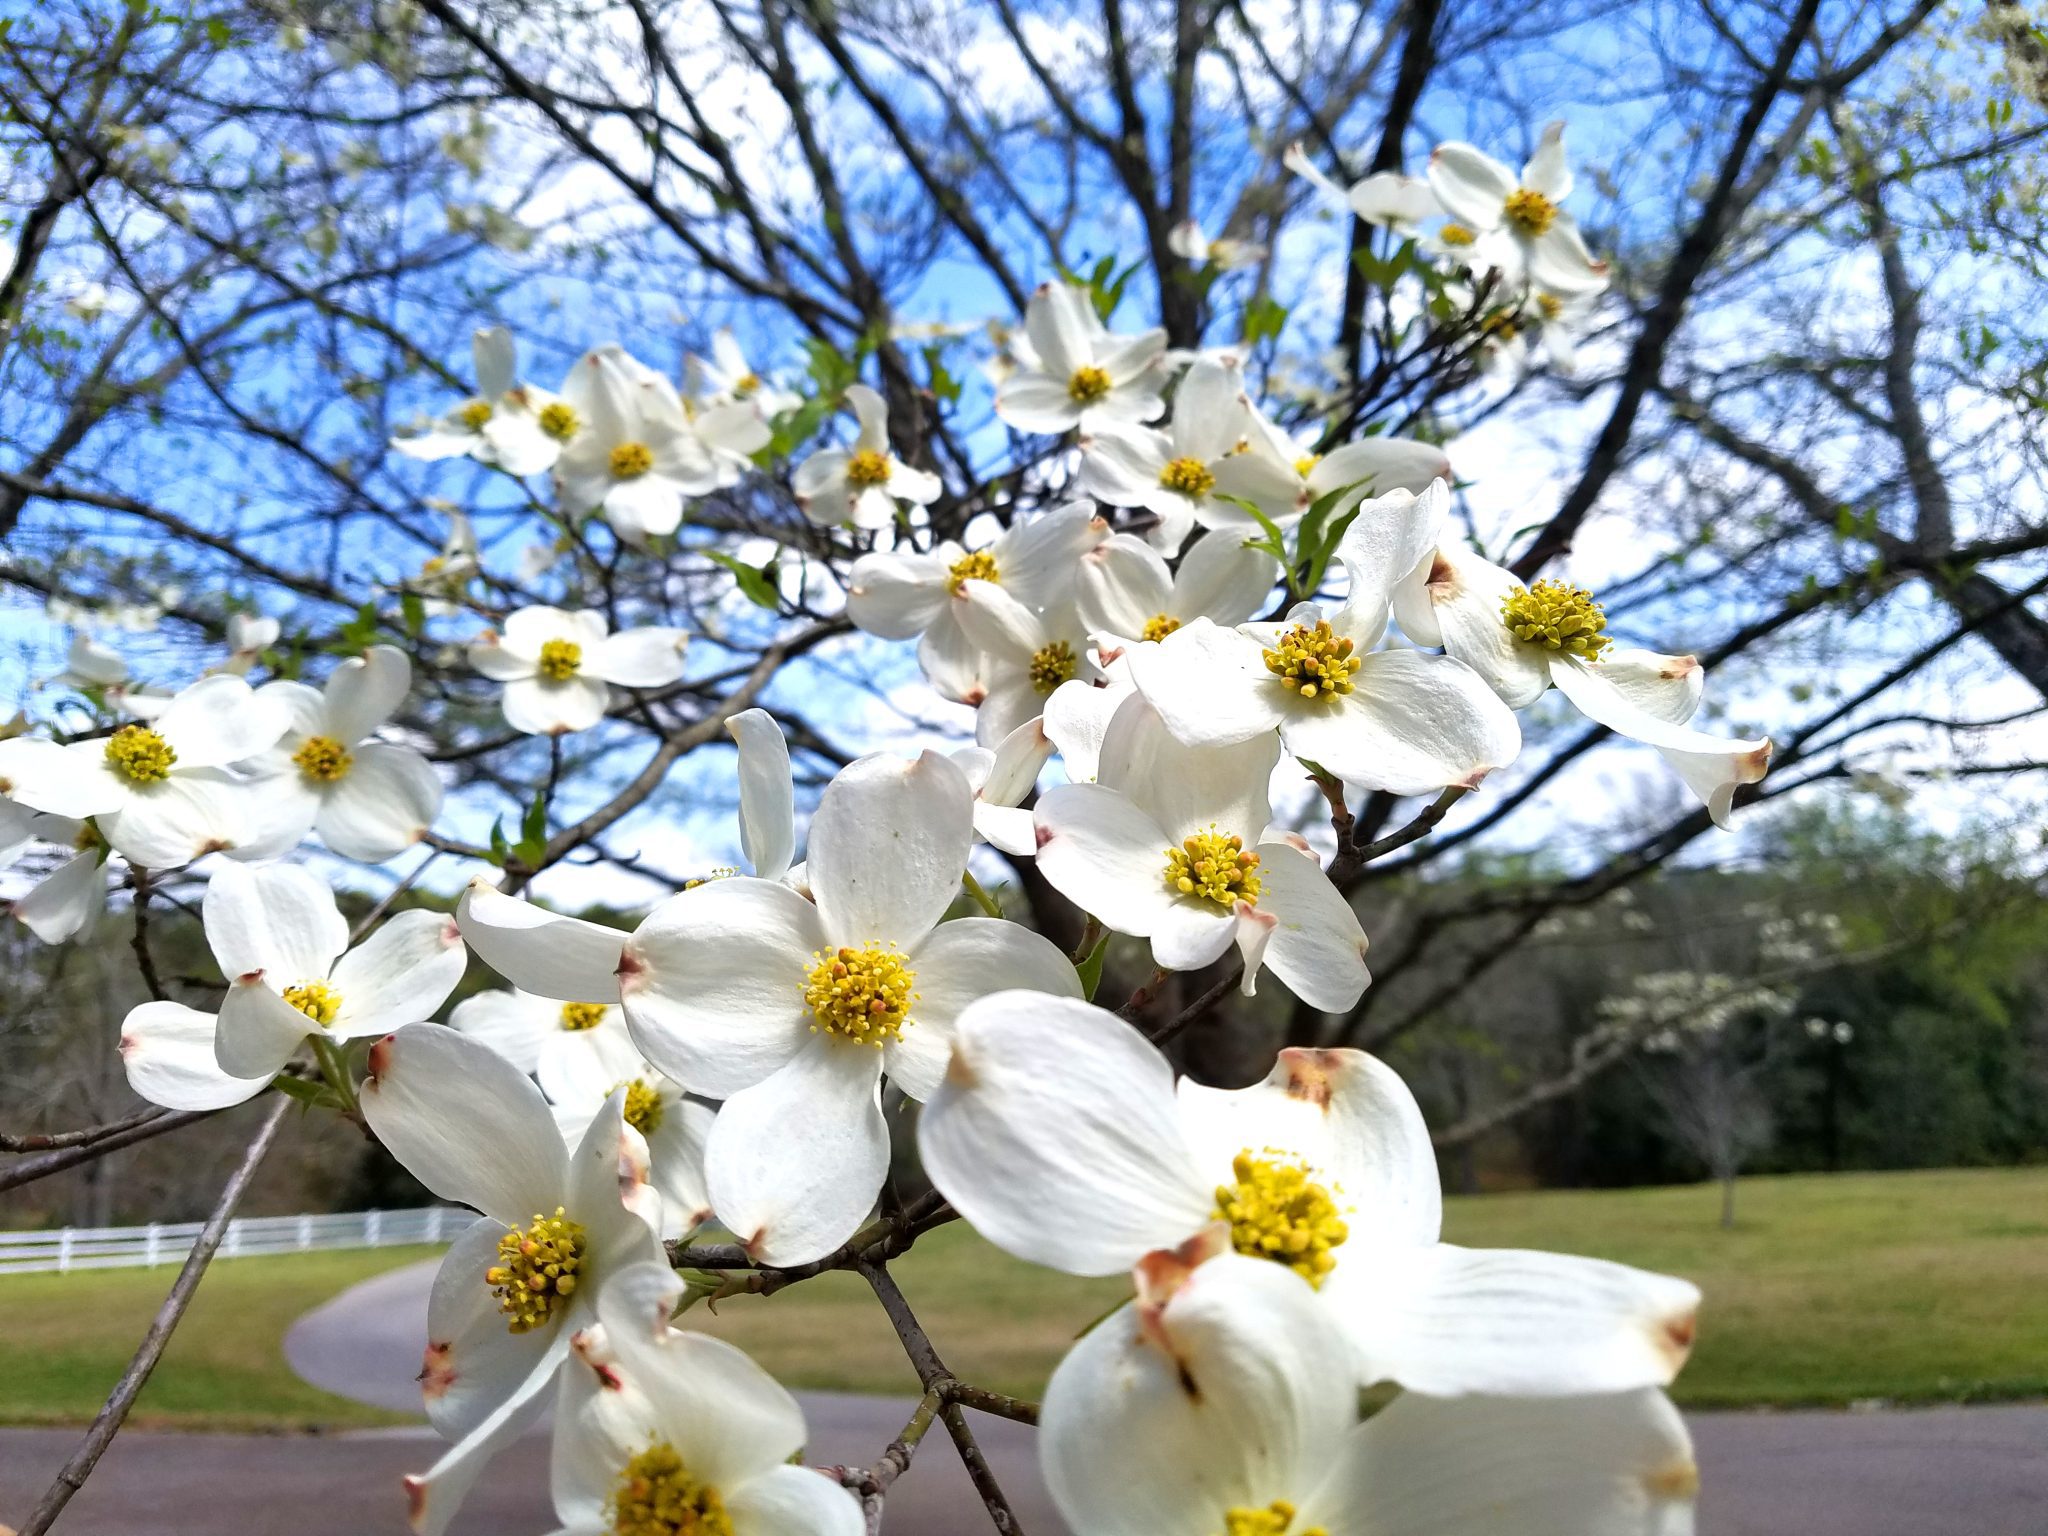 Florida dogwood (Cornus florida) is a native understory tree that blooms in spring. Its fruits and flowers support a variety of wildlife. It grows best under afternoon shade.